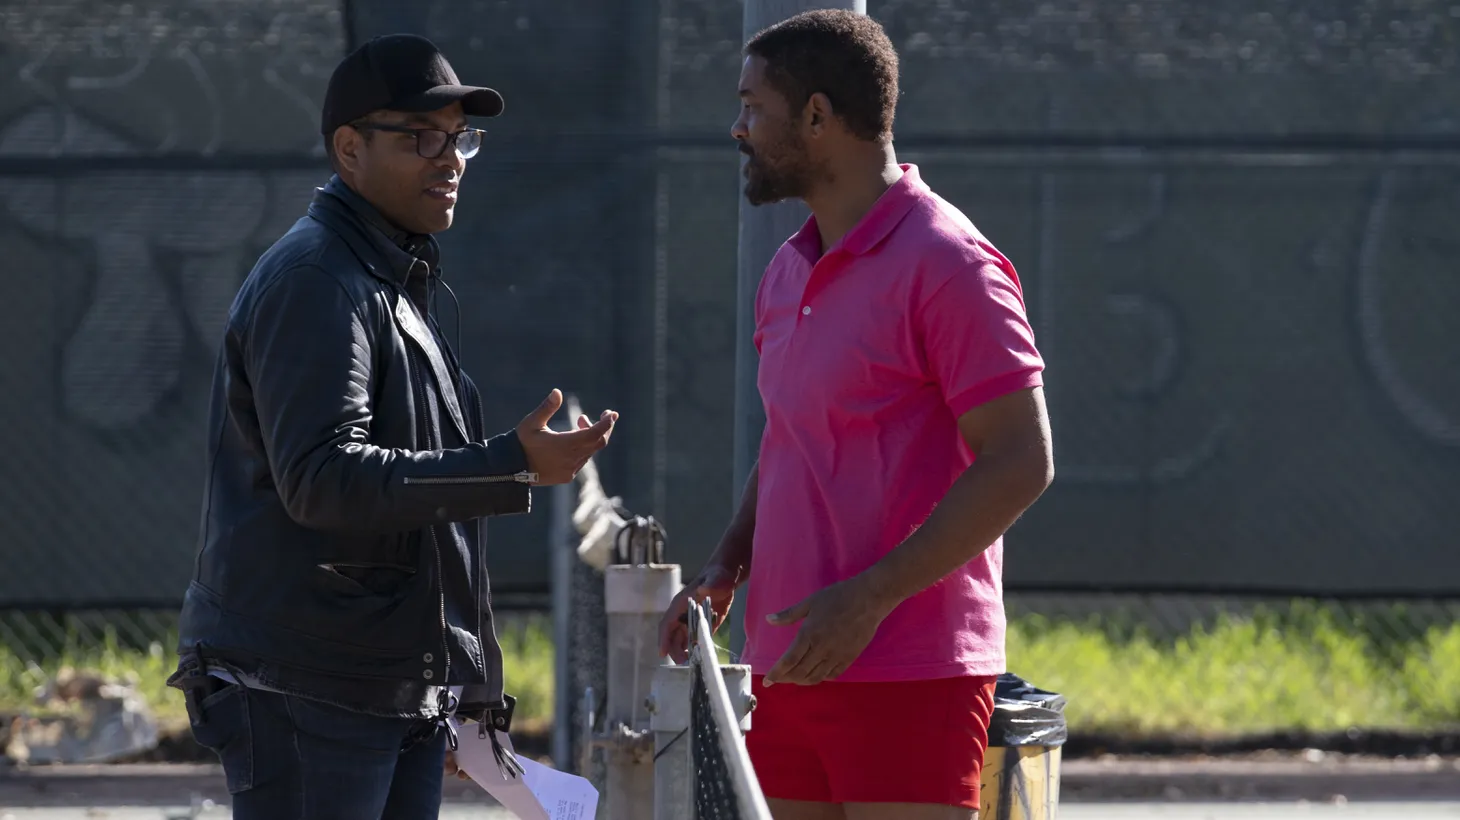 “King Richard” director Reinaldo Marcus Green appears on set with star Will Smith.